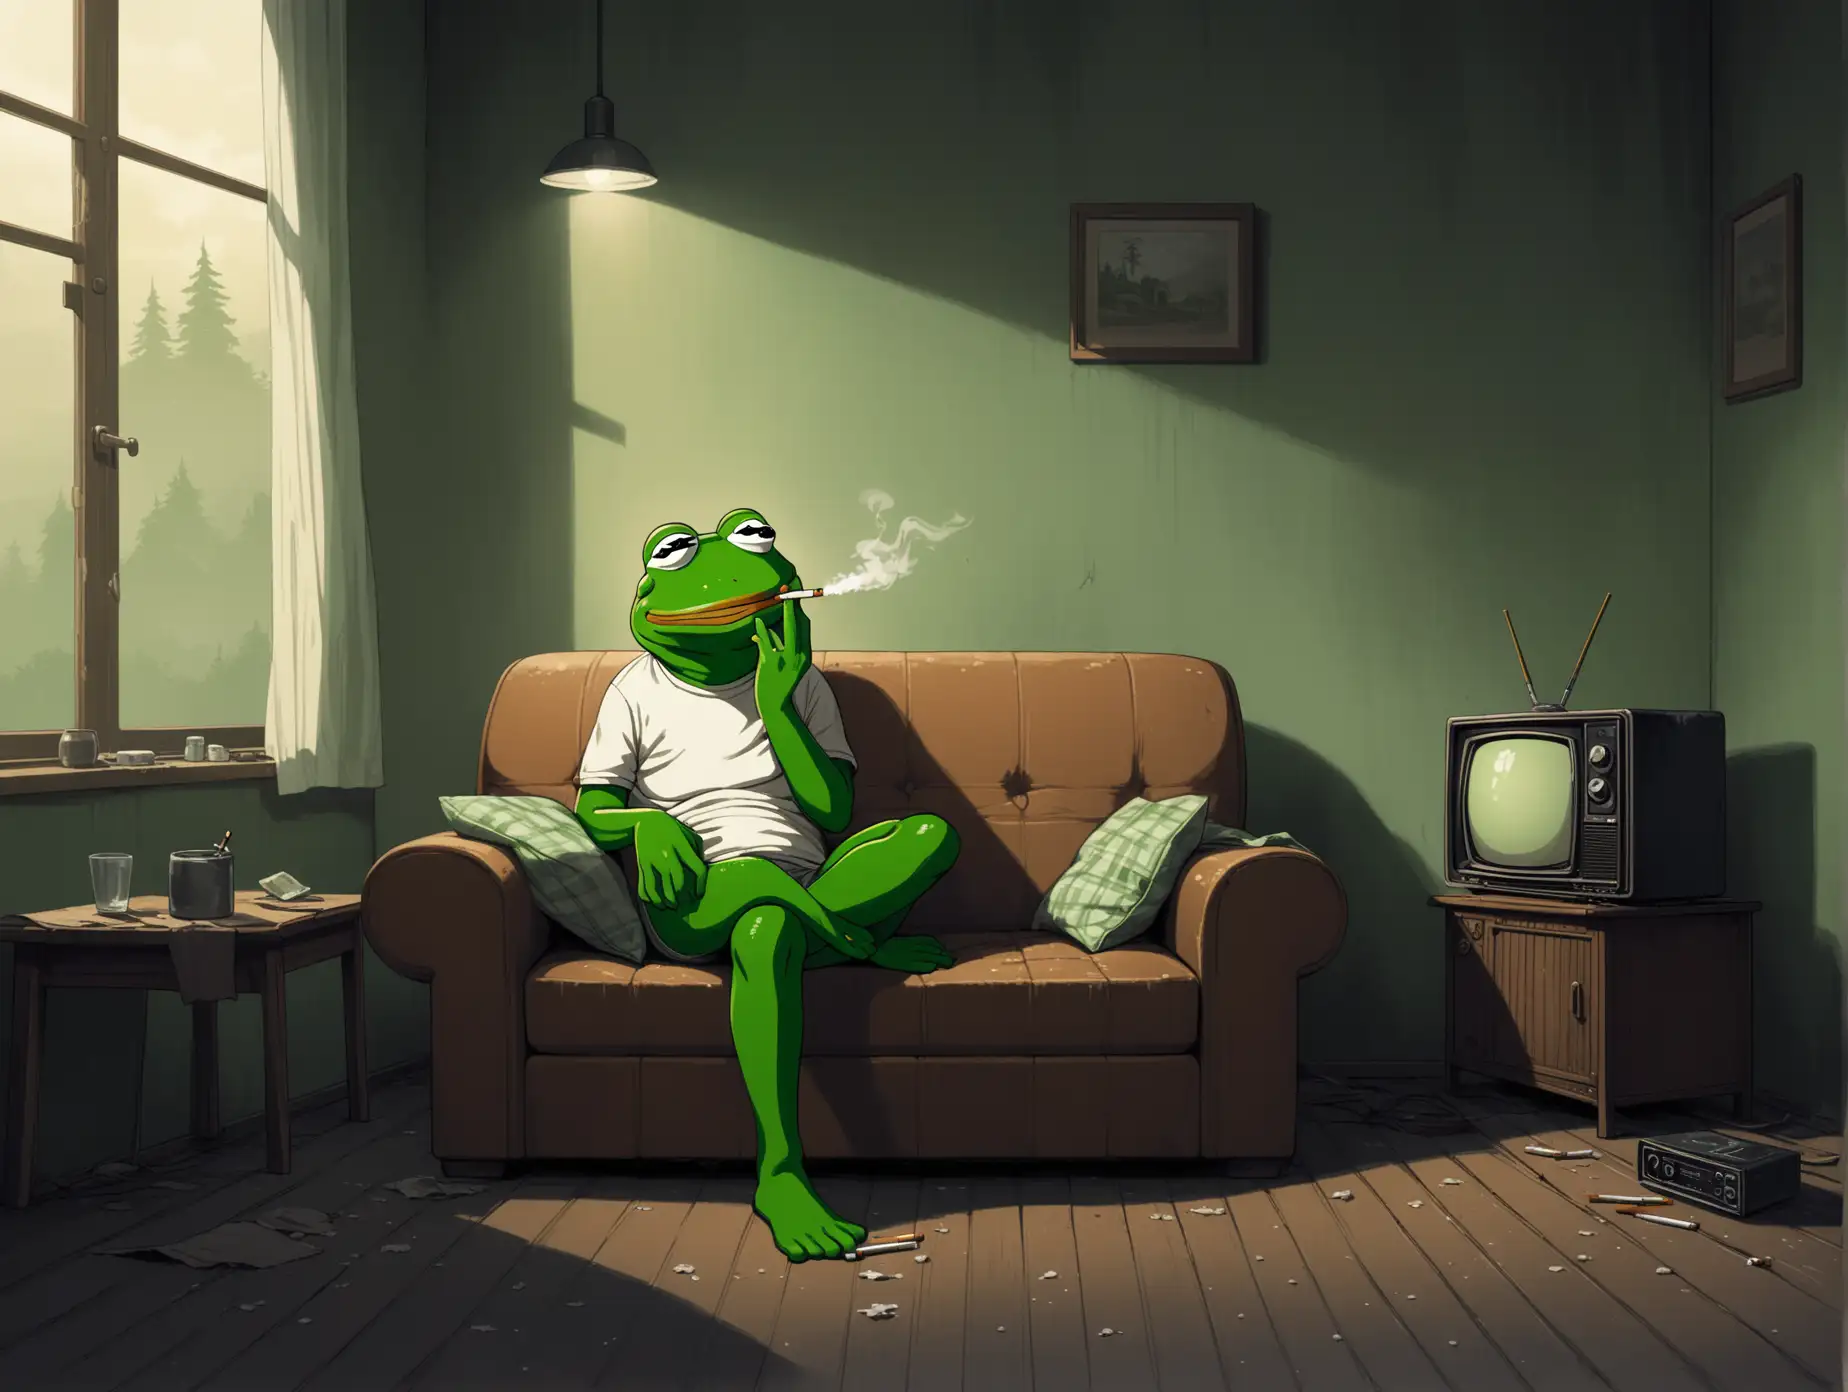 Pepe the Frog sits at home in a gloomy atmosphere, in a dirty white T-shirt, watching TV, a cigarette in his hand, and stubble on his face.
Pepe could be depicted sitting on a sofa or old armchair, a smoking cigarette in his hand. The image of Pepe could be realistic and a bit sad to underline the gloomy atmosphere.
The color palette might be dark and gloomy, soft transitions from dark to light are possible. The background could incorporate details of a living room, such as an old television, stuff scattered around the room."